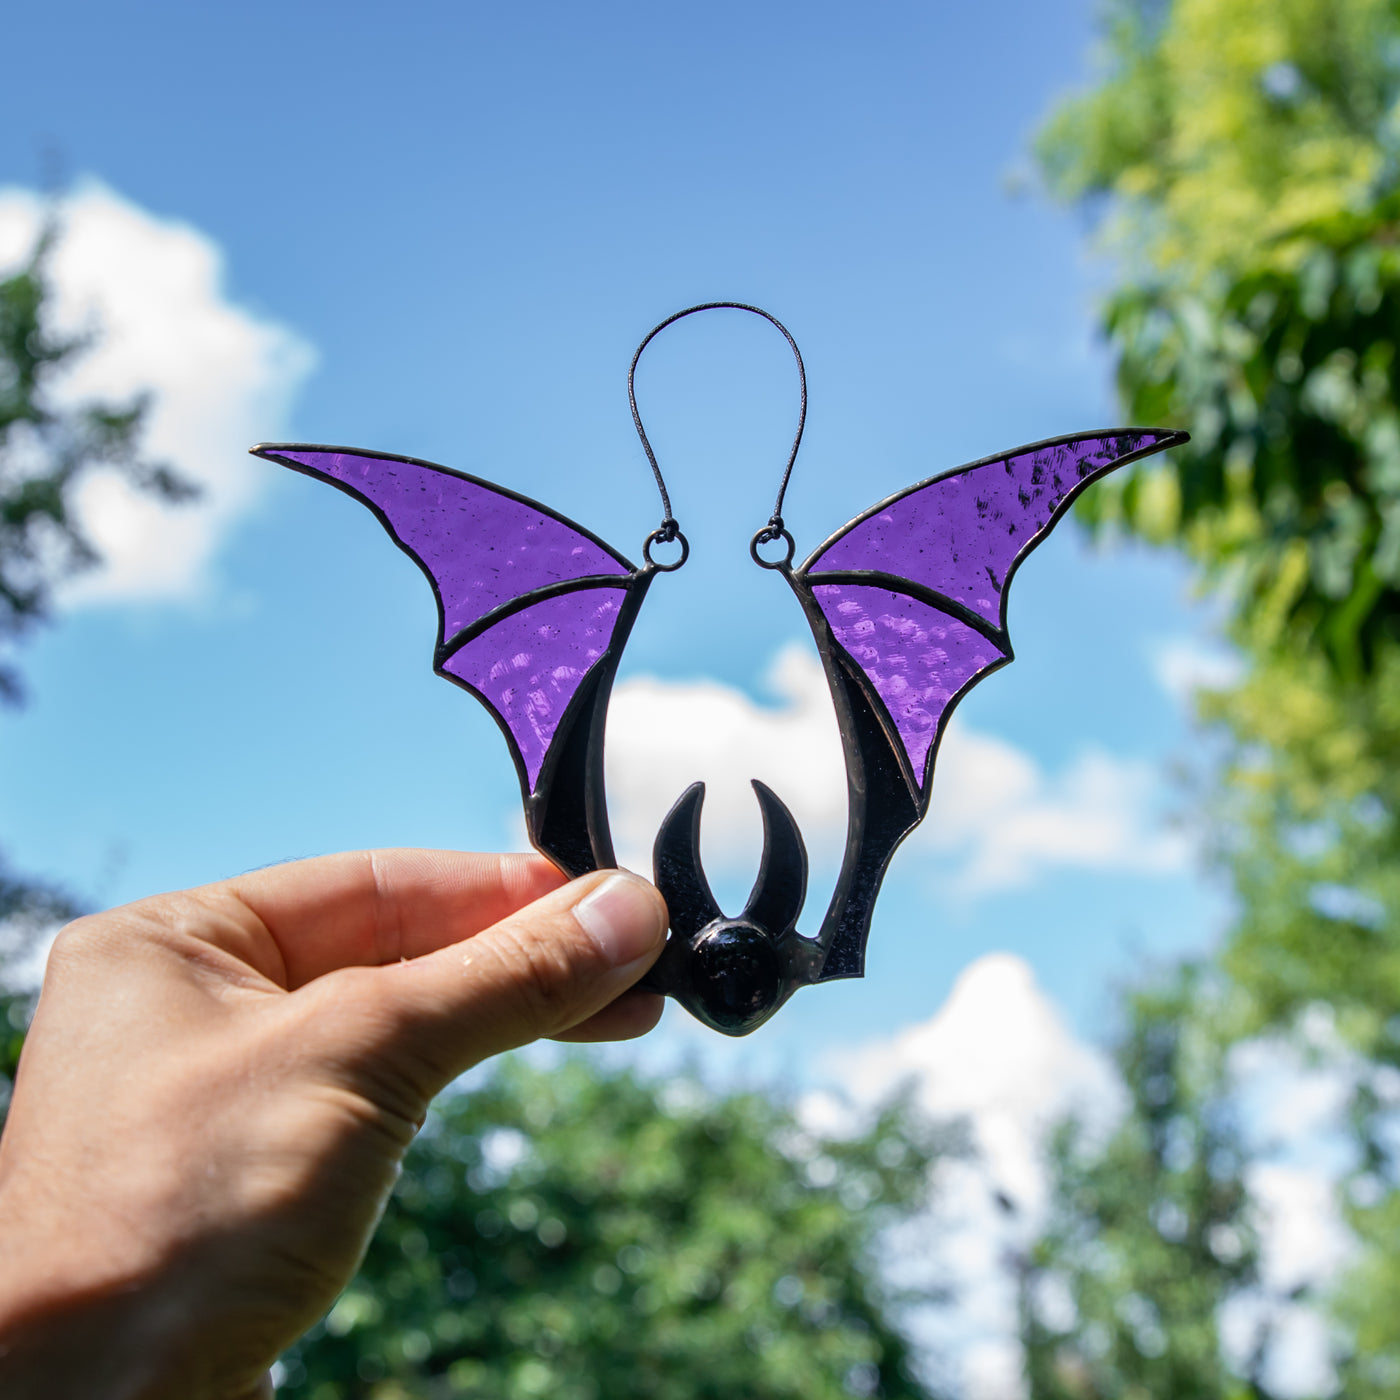 Suncatcher of a stained glass bat with purple wings